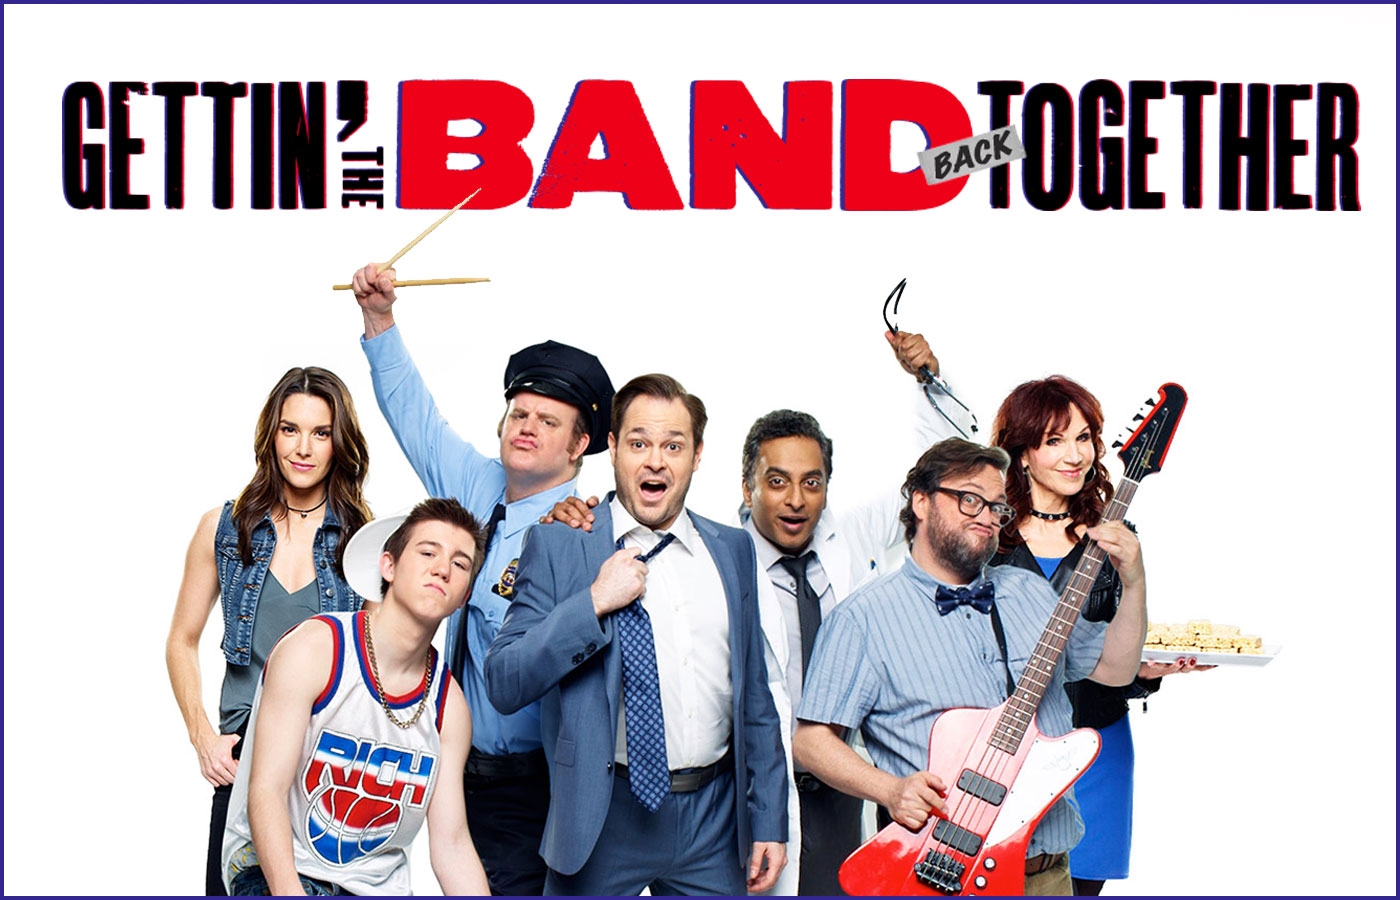 Mark Allen (Cycle 15) composed the score for GETTIN' THE BAND BACK TOGETHER which opened on Broadway this summer.